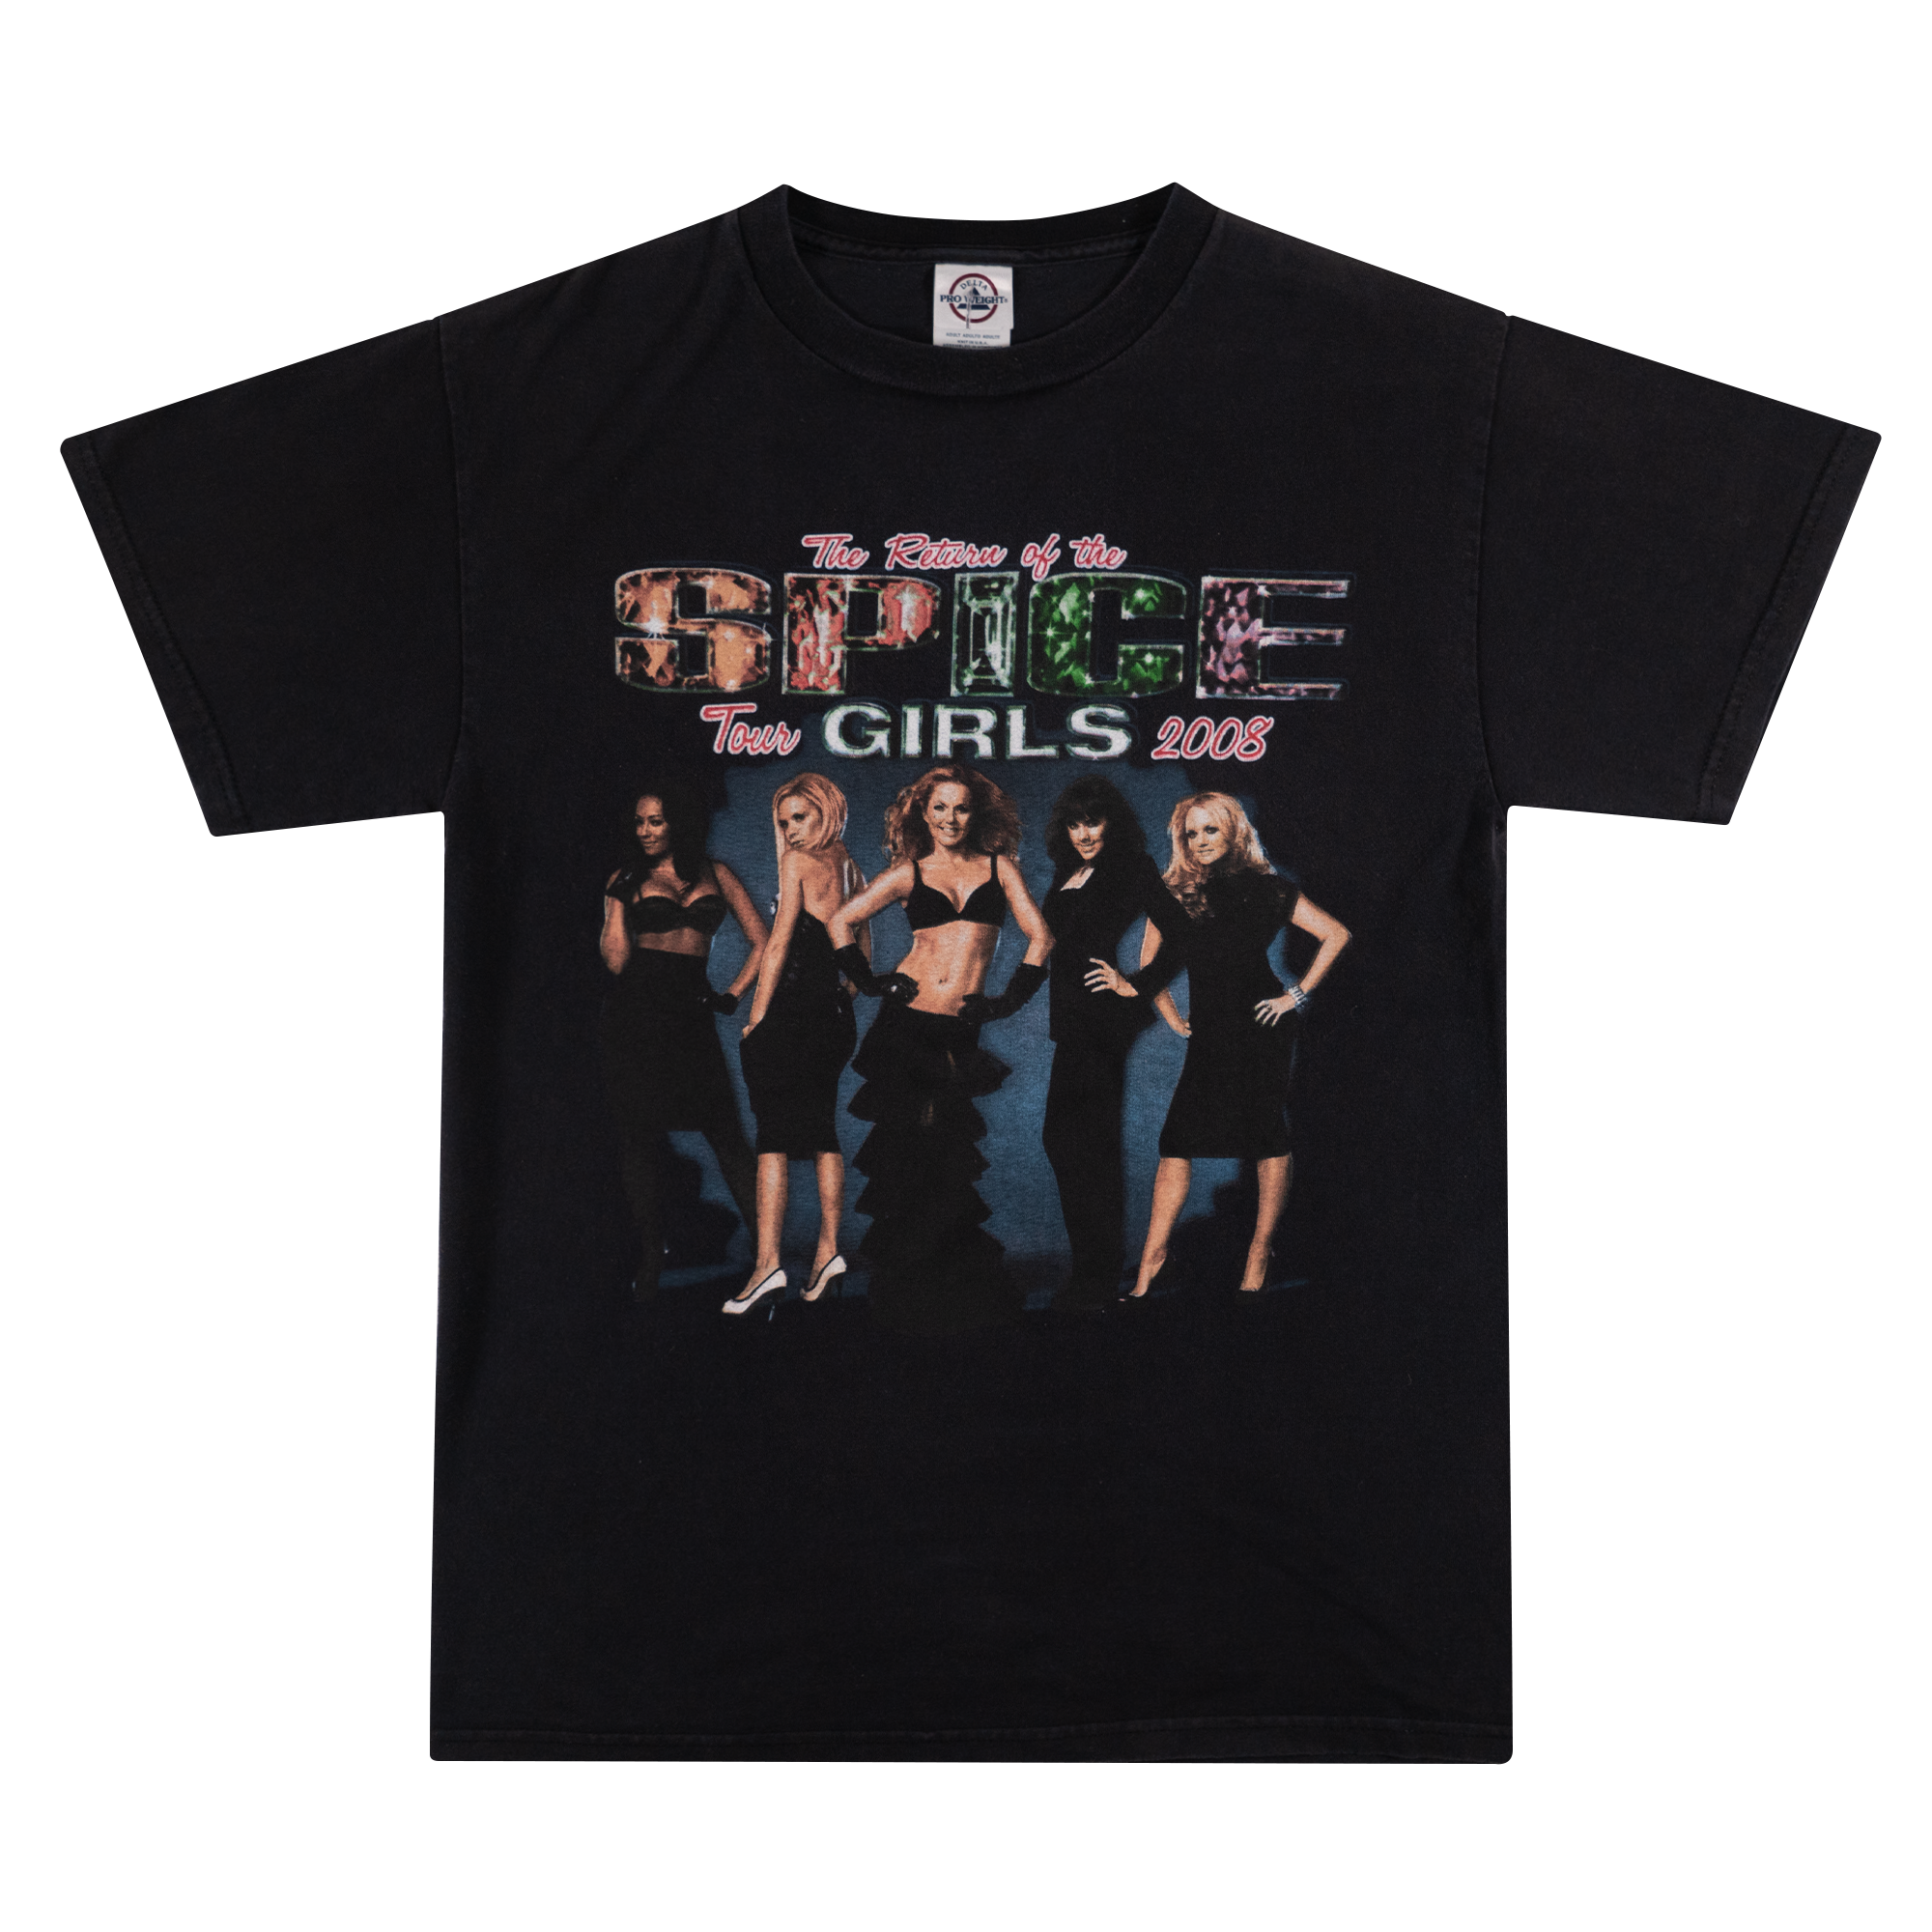 The Return of The Spice Girls Tour 2008 Tee Black-PLUS